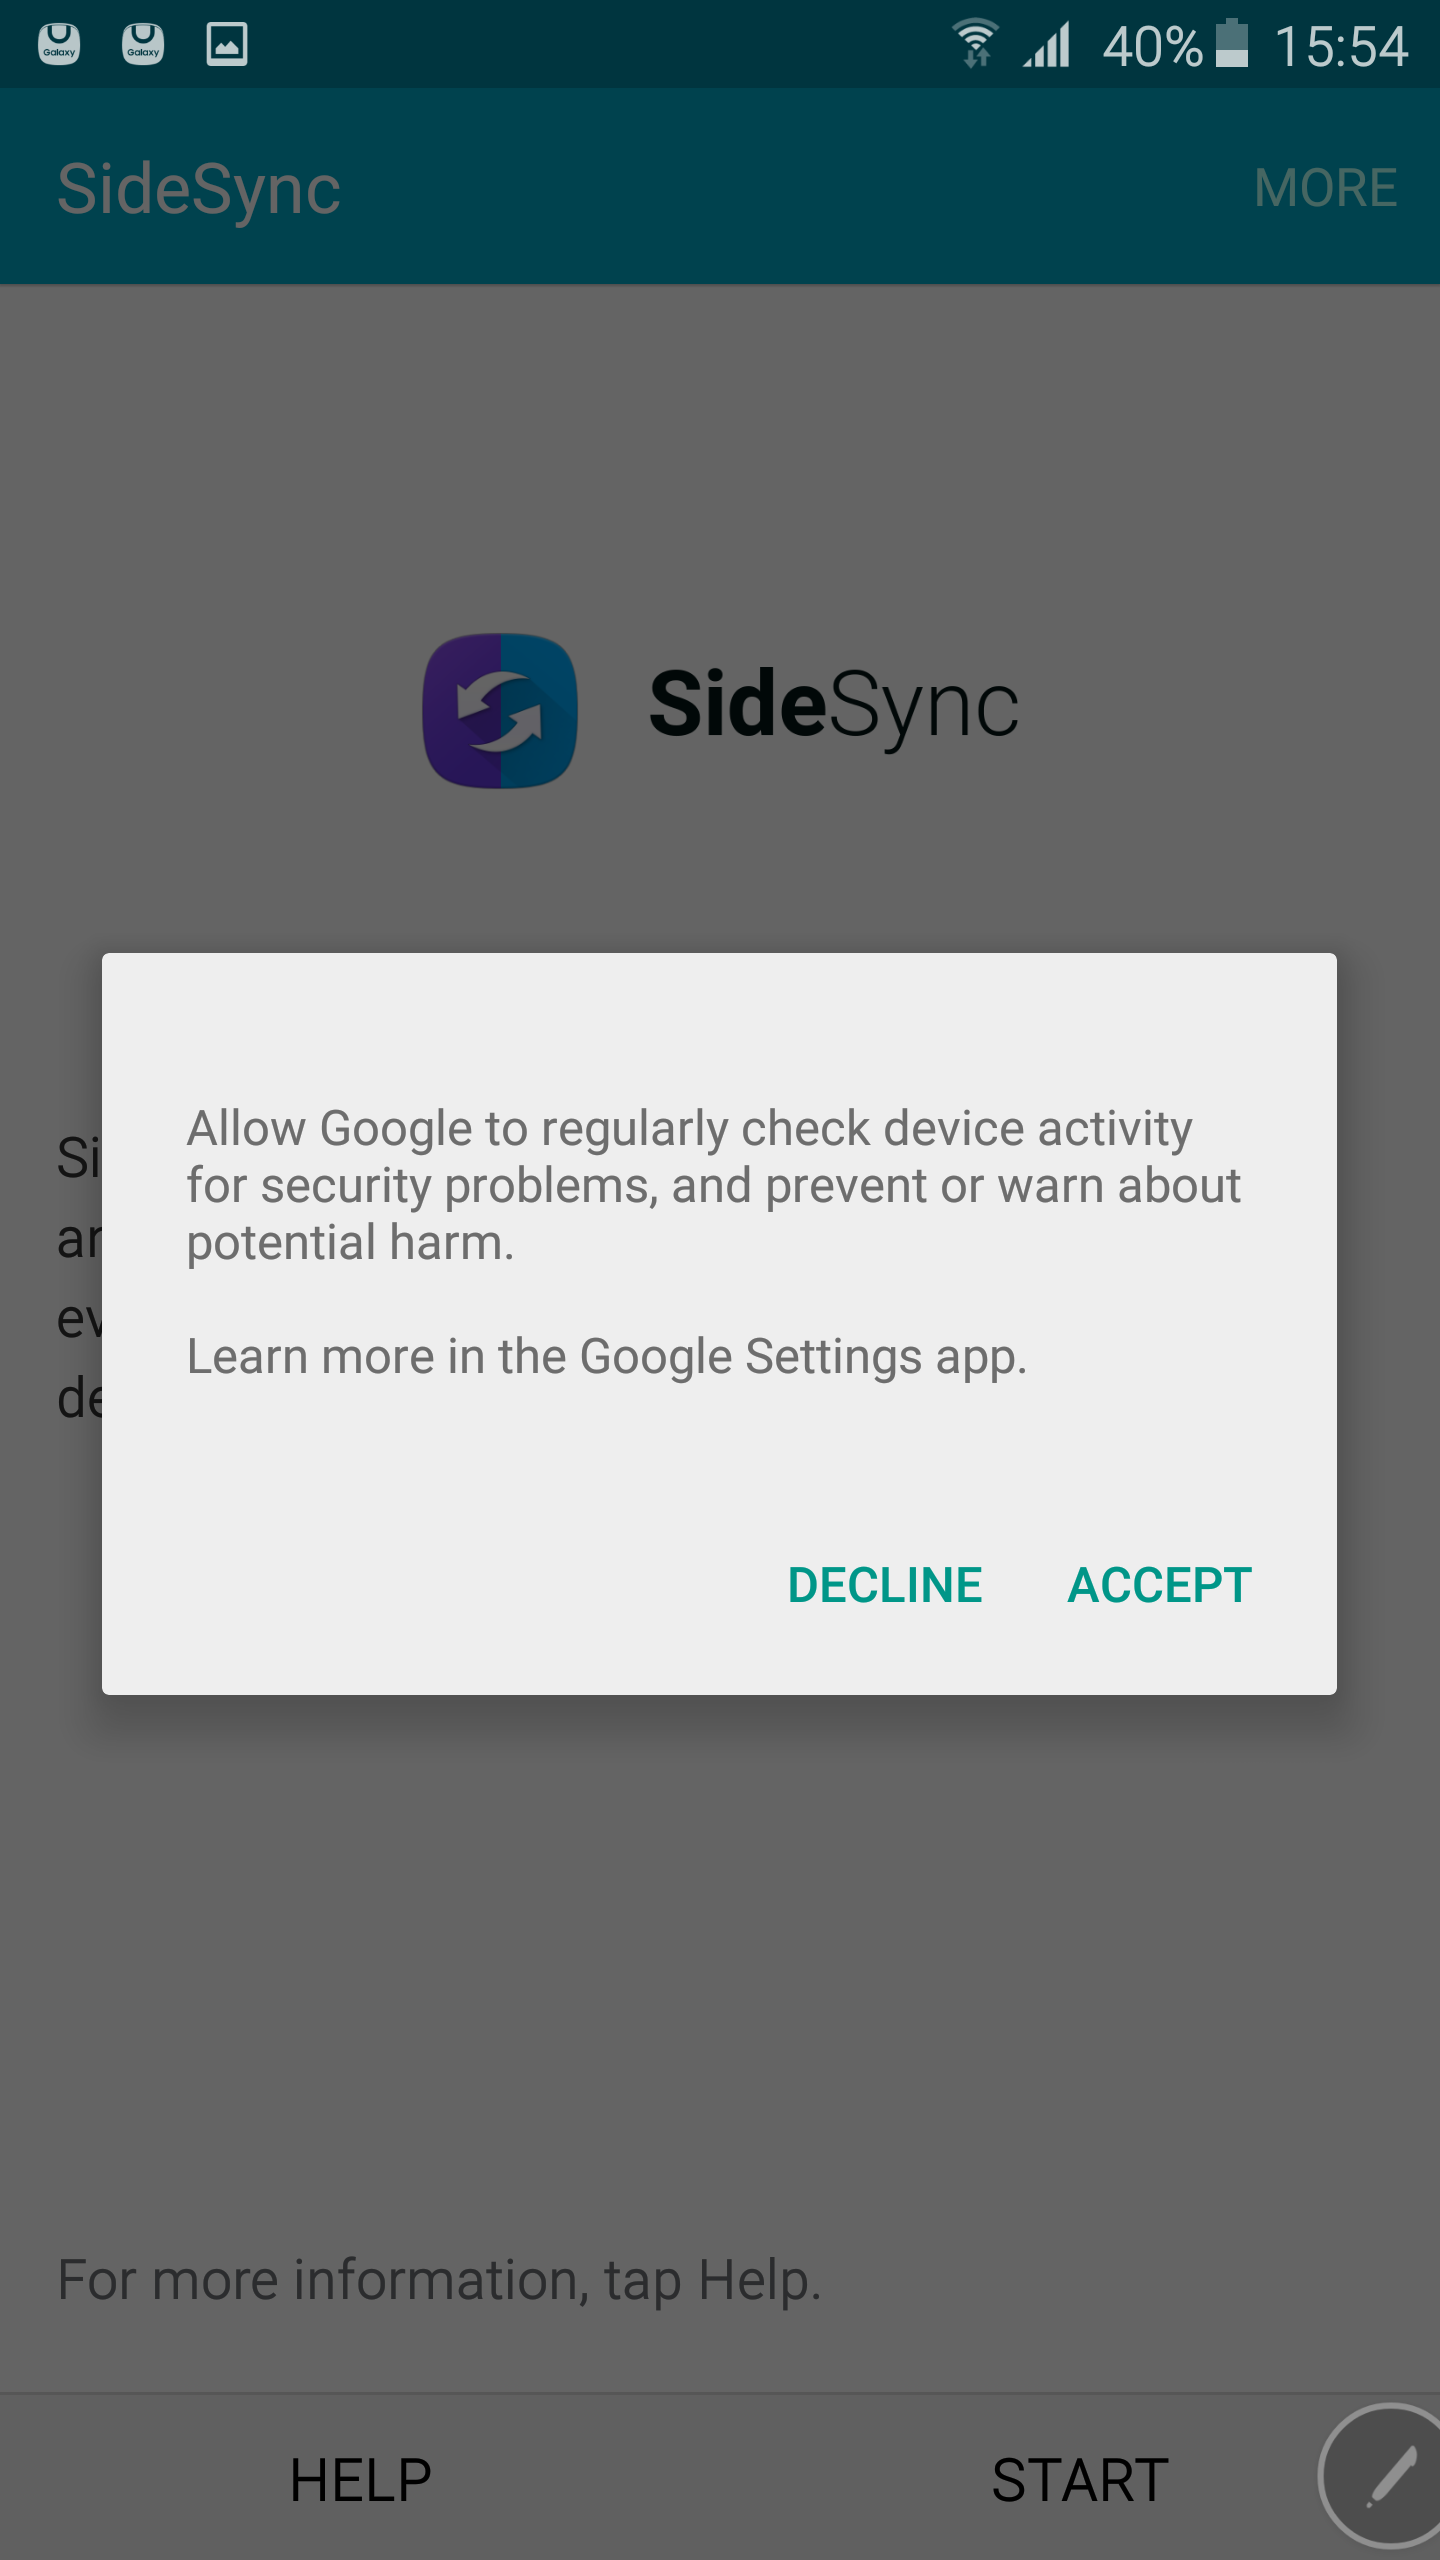 download samsung sidesync app for pc